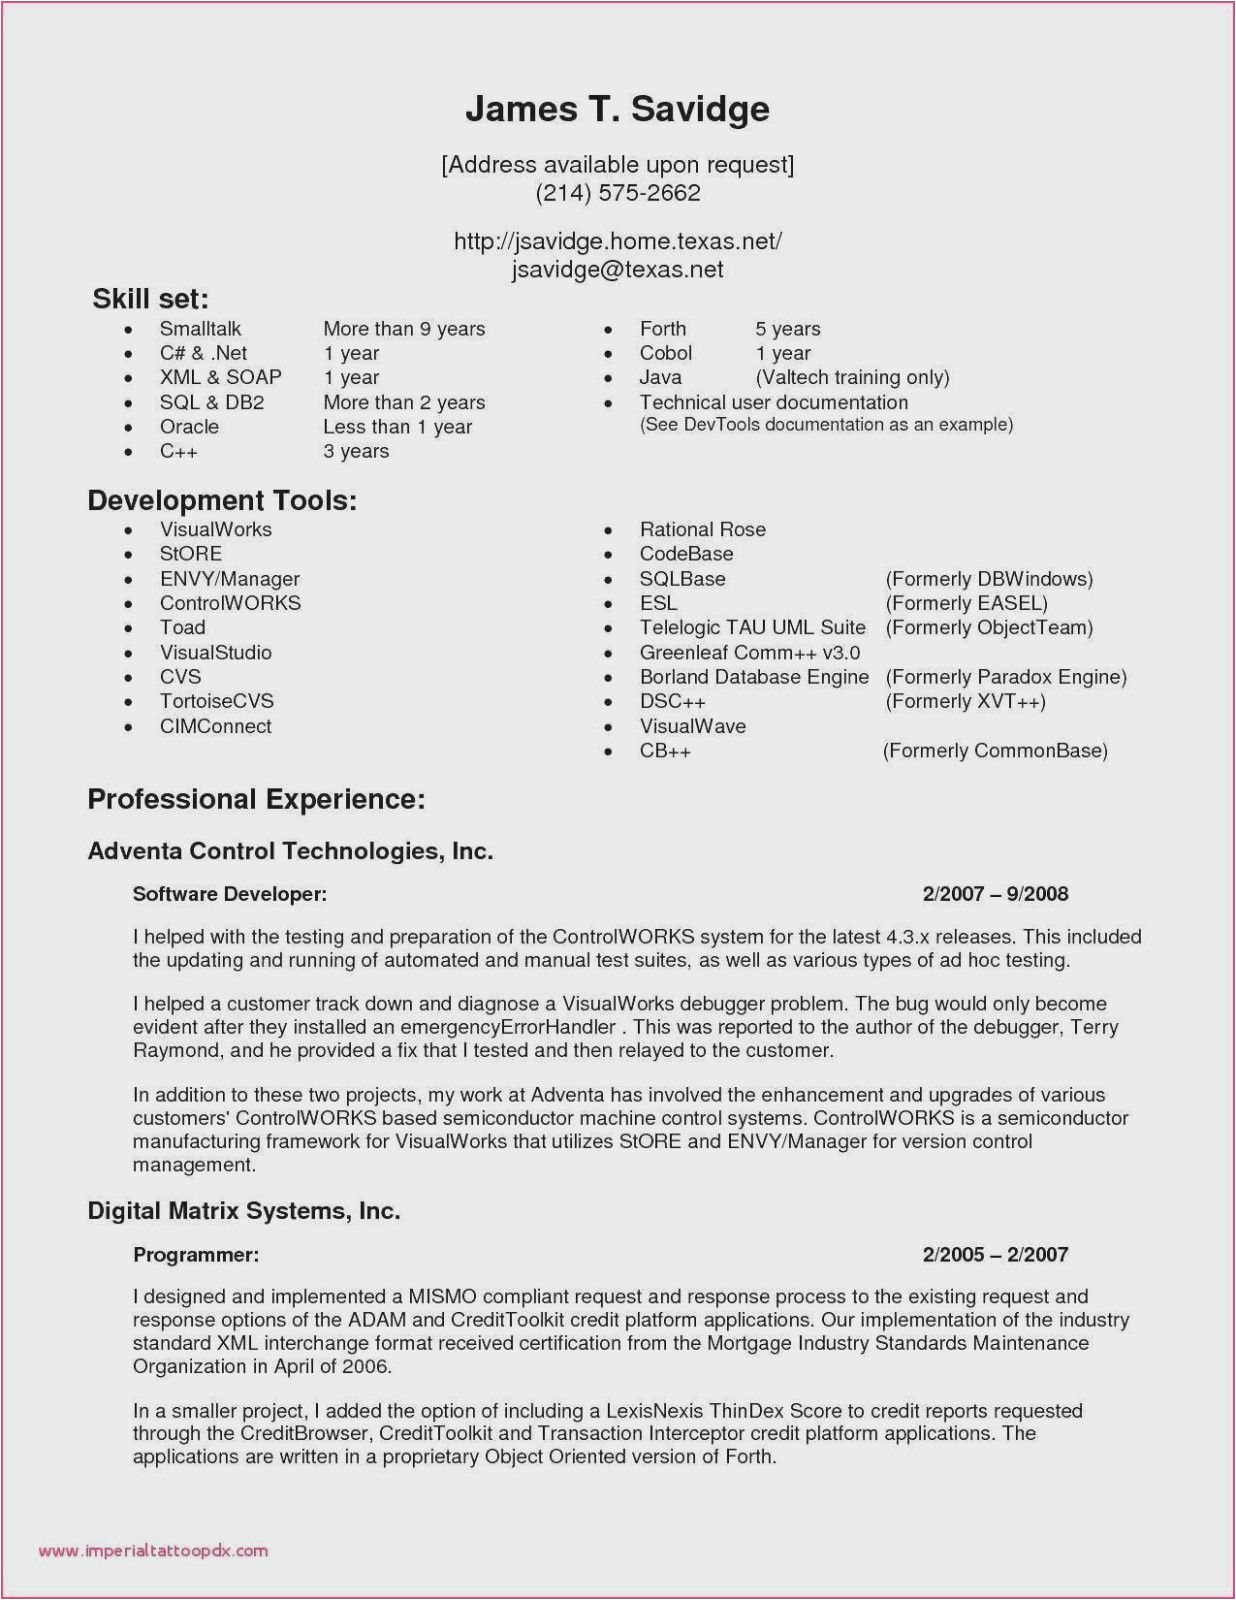 Sample Resume for Experienced Qa Tester Qa Tester Resume No Experience Amazing Eliminate Your